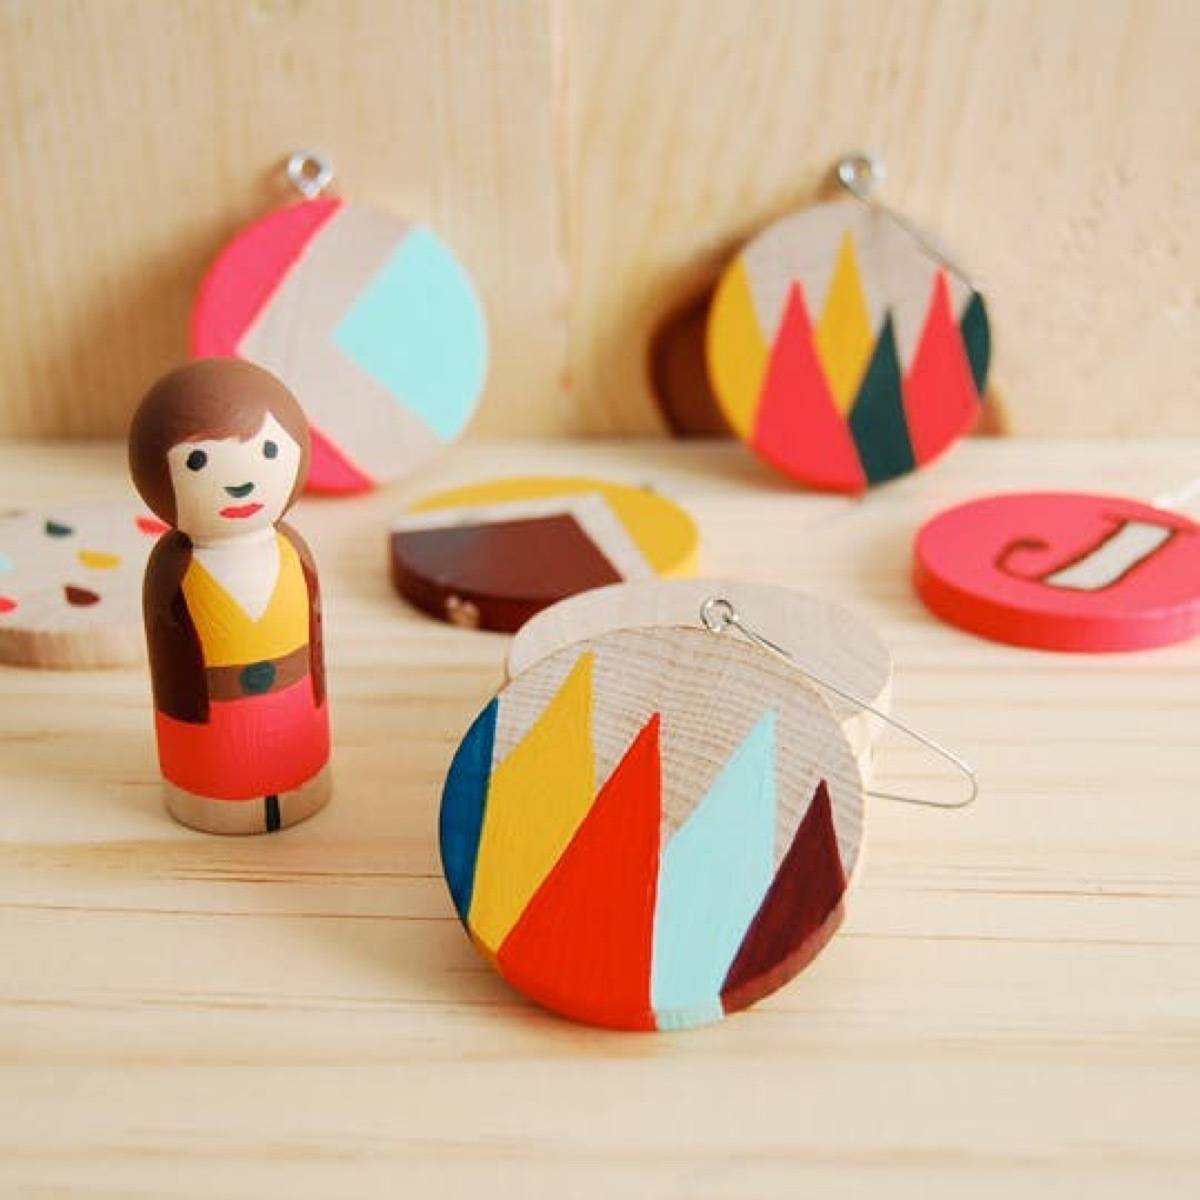 Quick and cute wood painted ornaments